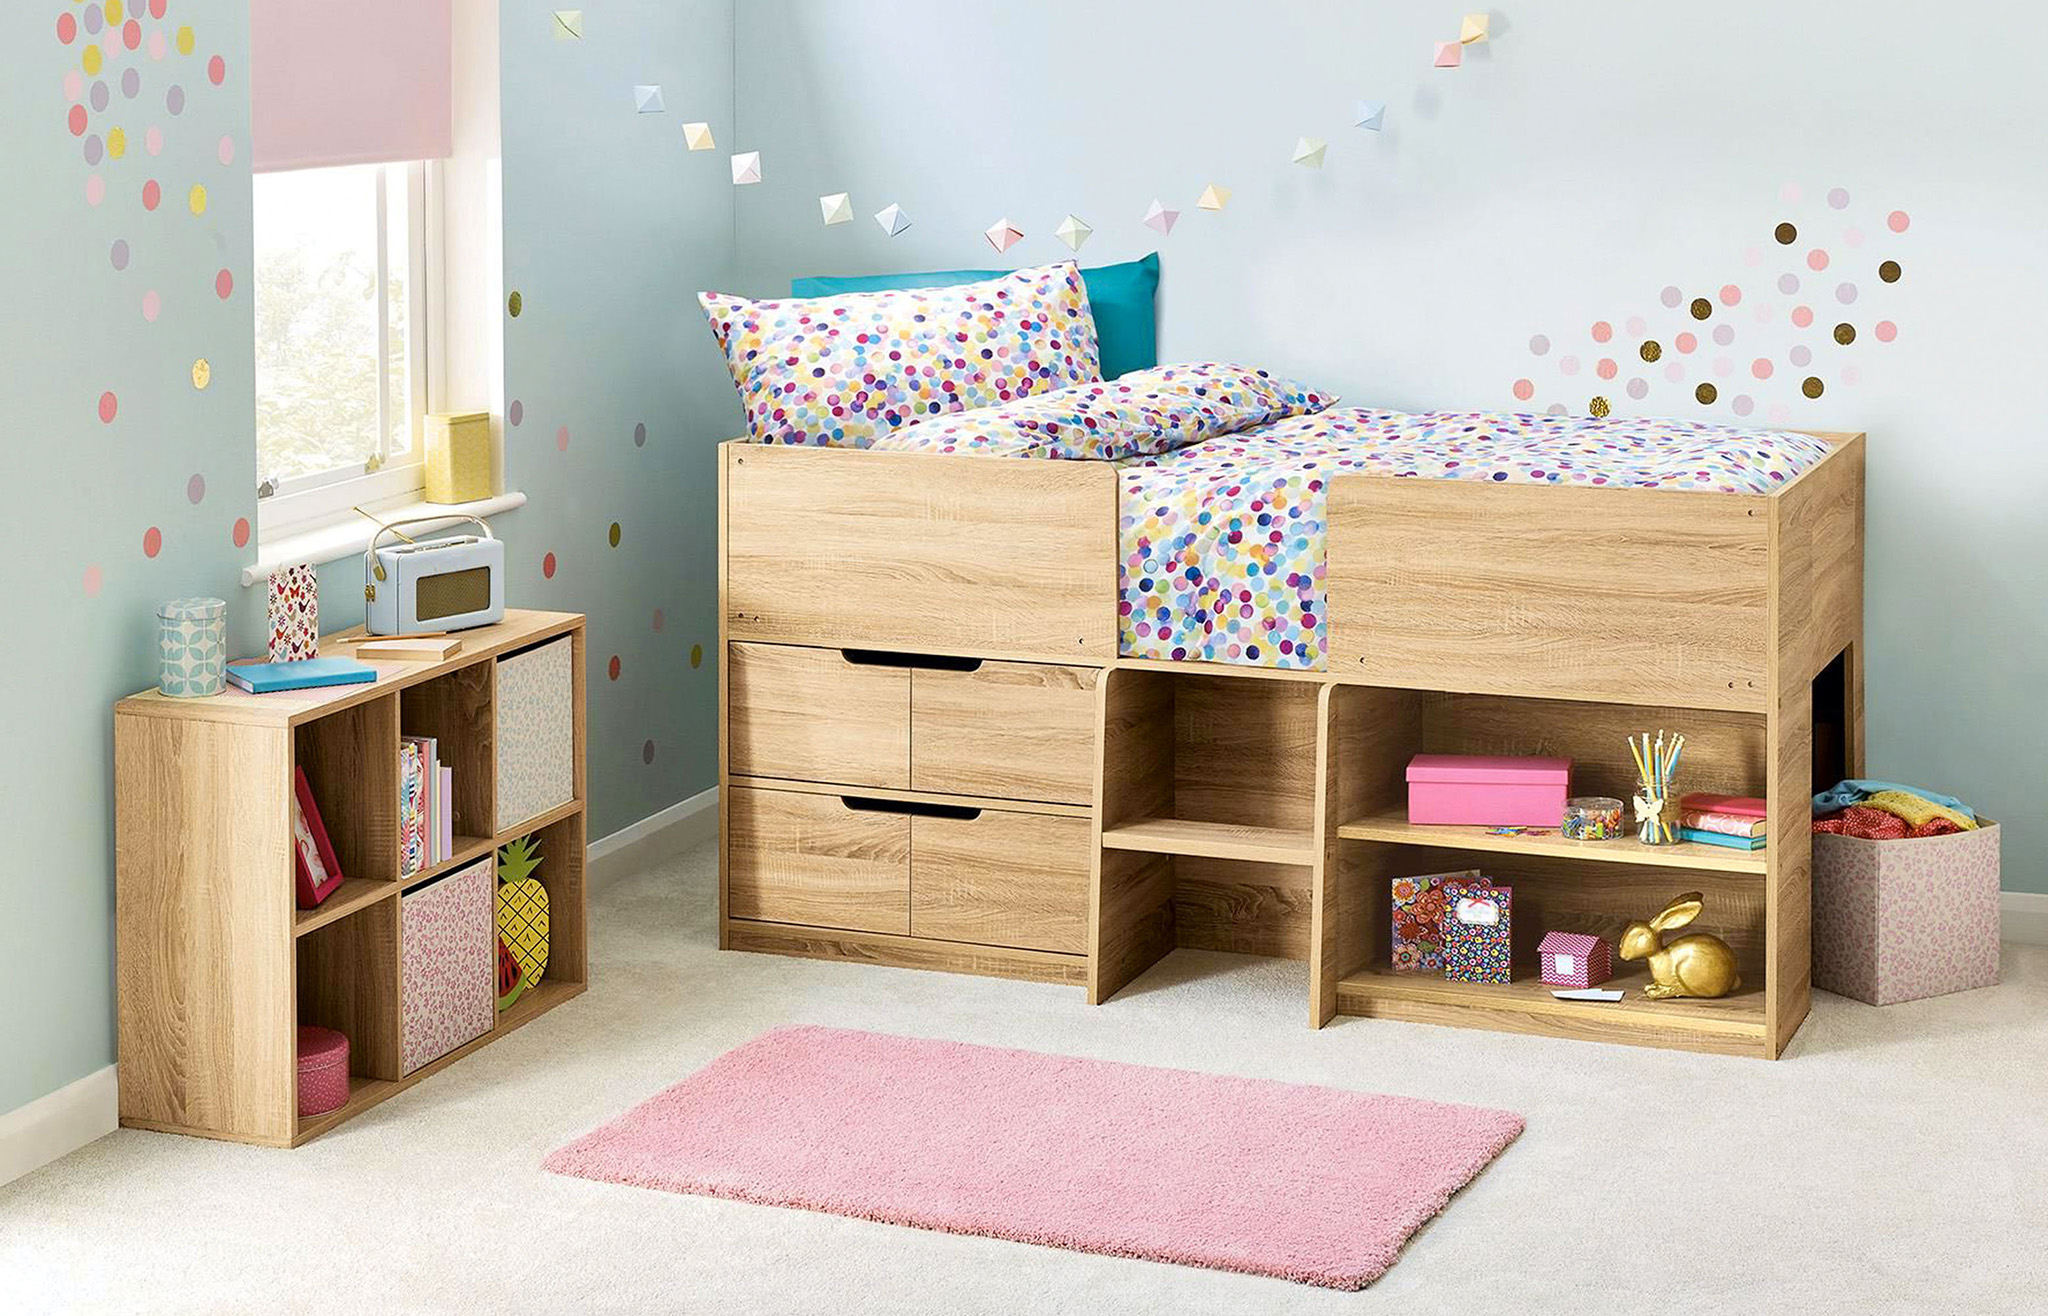 Fitted Wardrobes Ideas Children S Bedroom Ideas